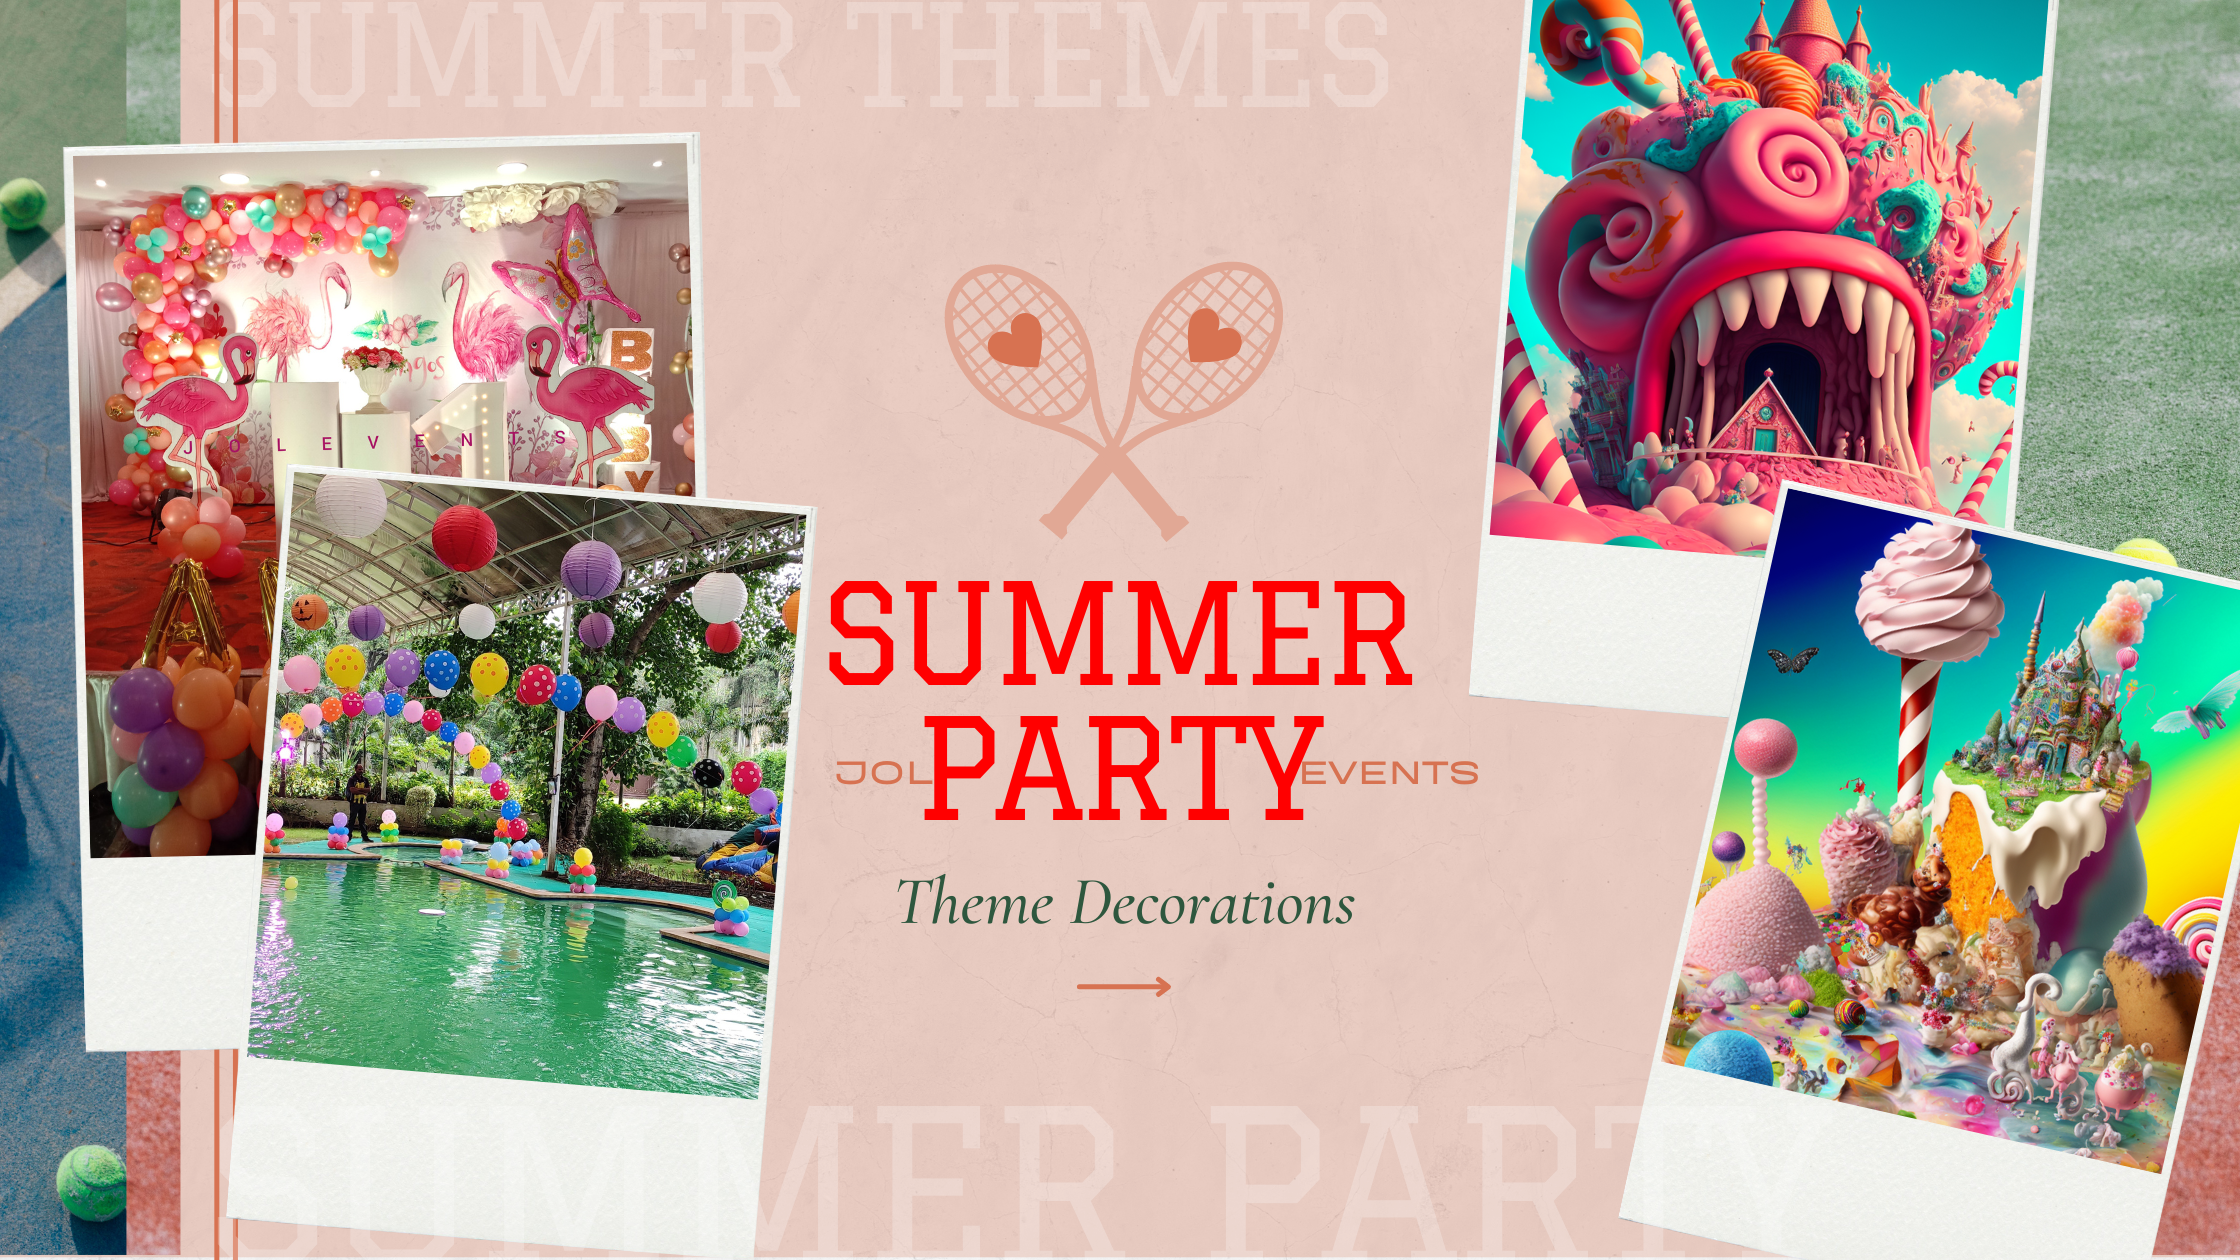 What are Some Theme Ideas For Kids Summer Birthday Party? – jolevents